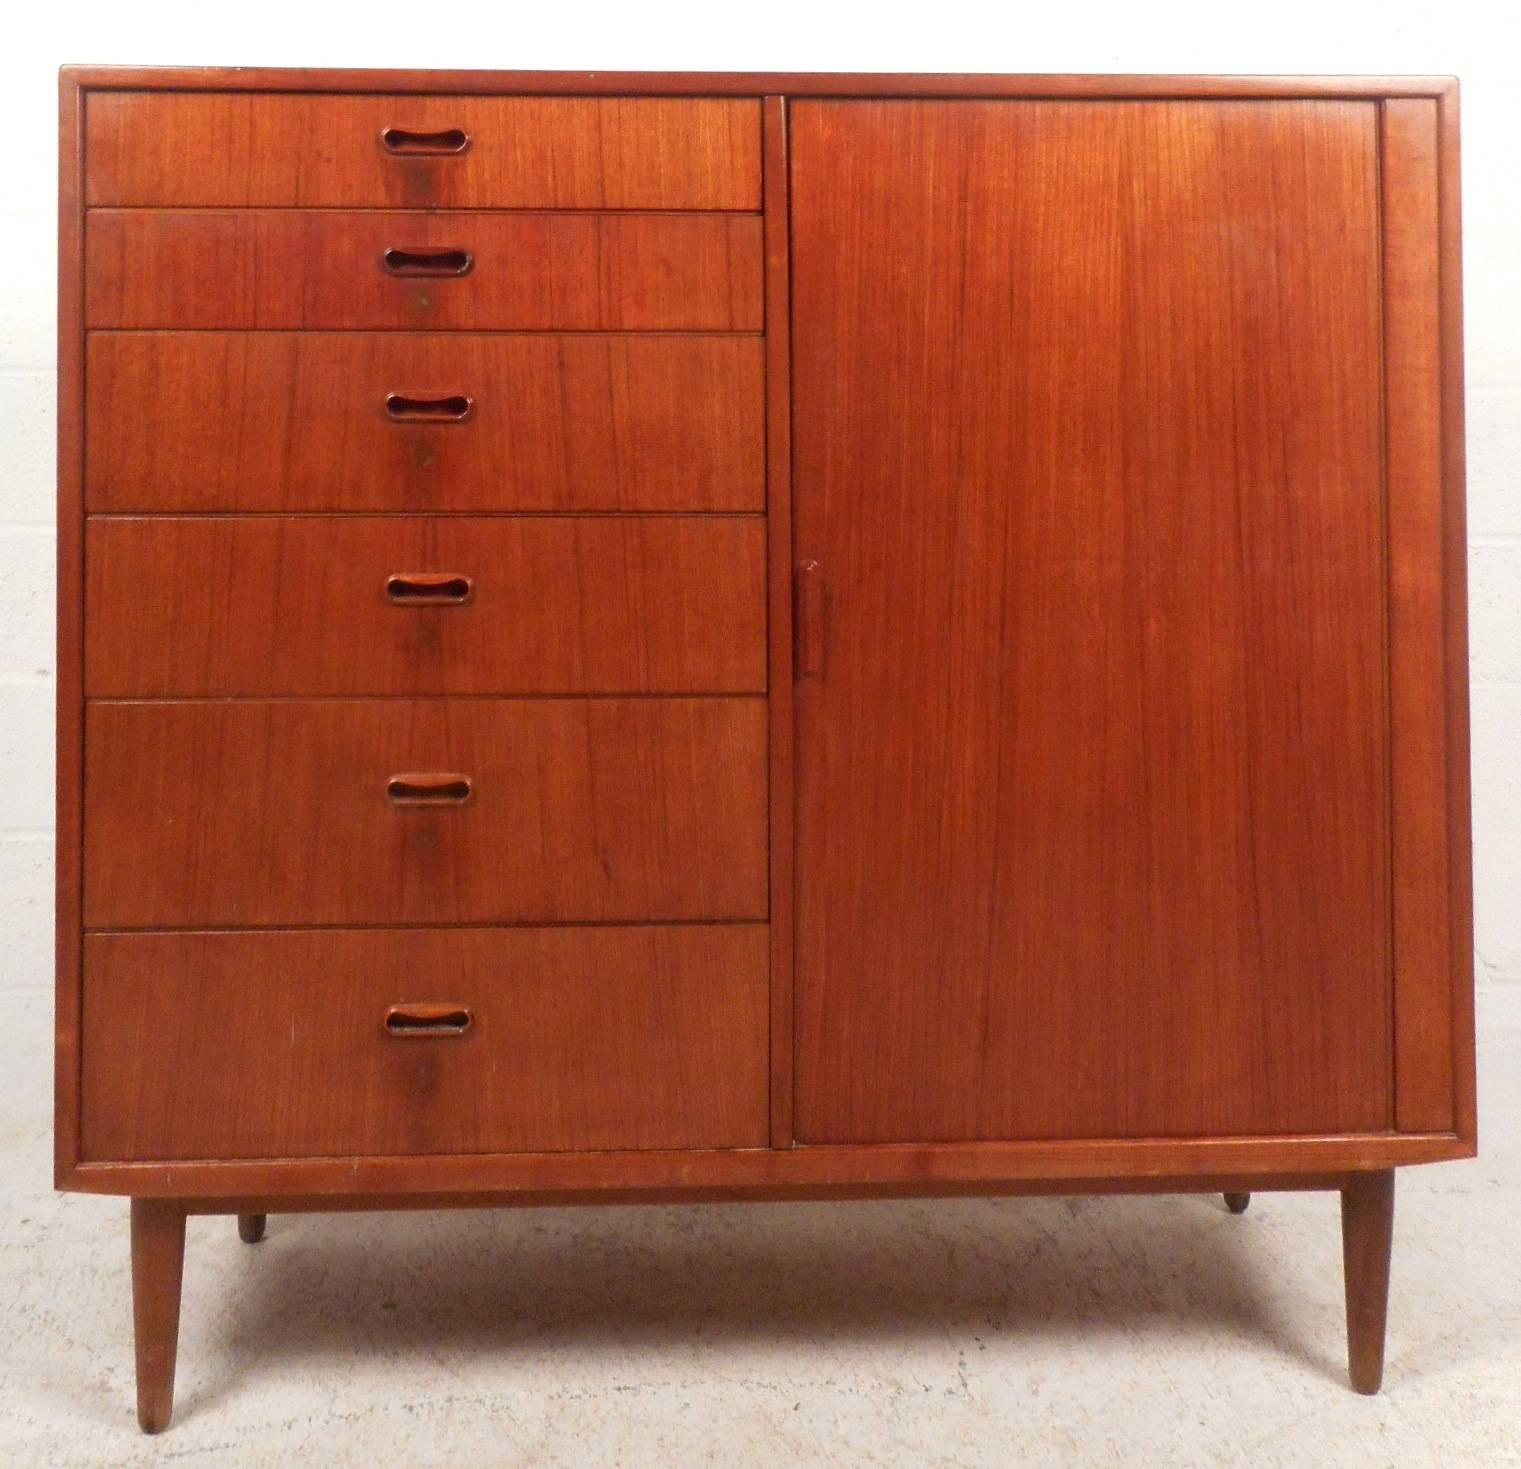 This gorgeous vintage modern gentleman's chest features an abundance of storage space within its 12 hefty drawers. Sleek design has unique carved pulls on six of its drawers and a tambour door that slides open to unveil six more drawers. Impressive